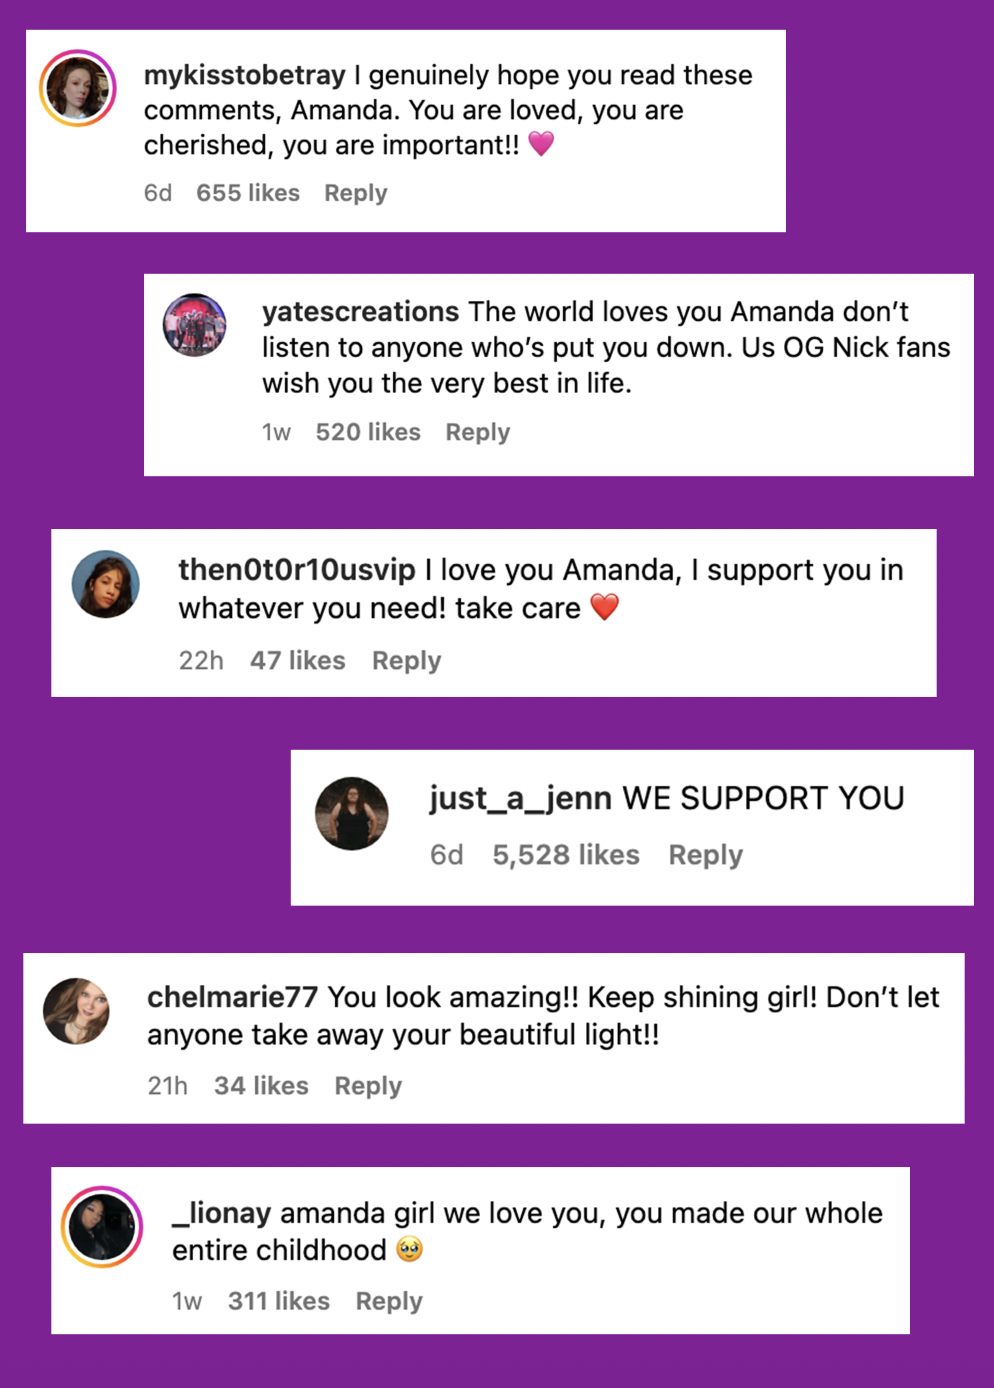 Summarized comments showing support and encouragement for Amanda, with sentiments of love and admiration expressed by various users